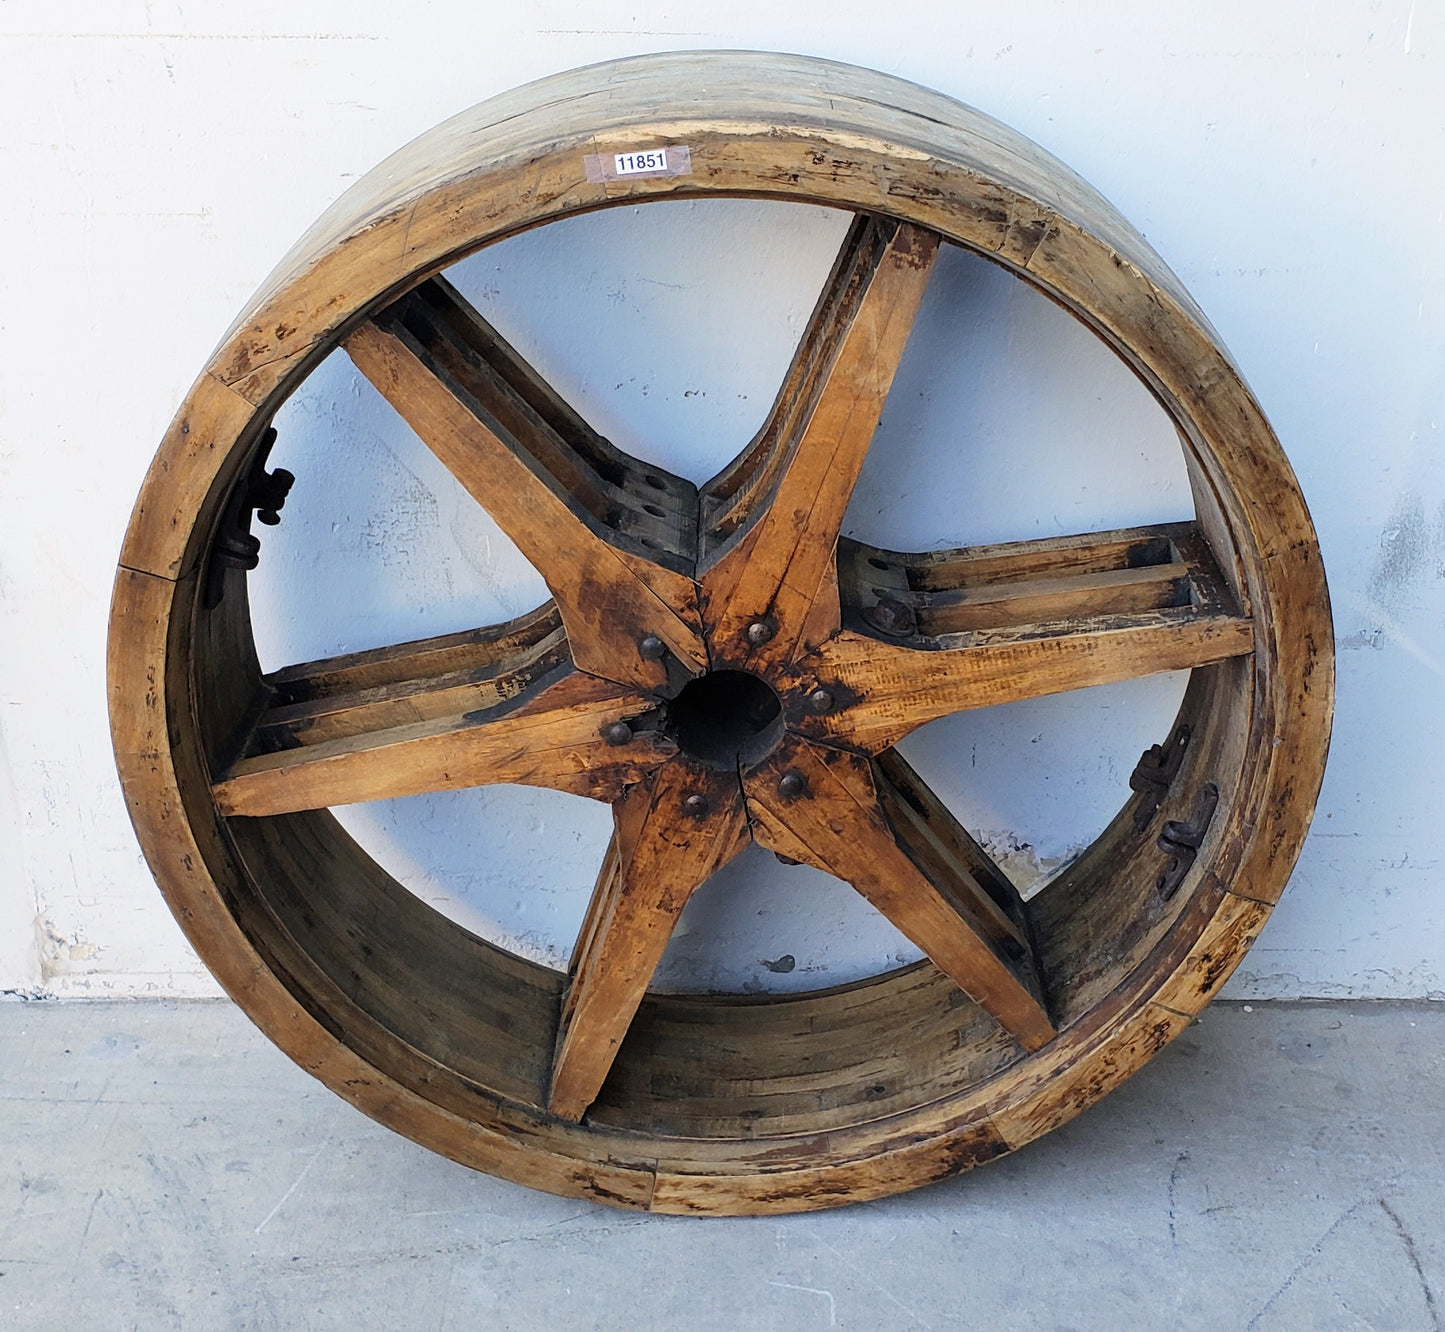 Wooden Wheel / Cog with 6 Spokes